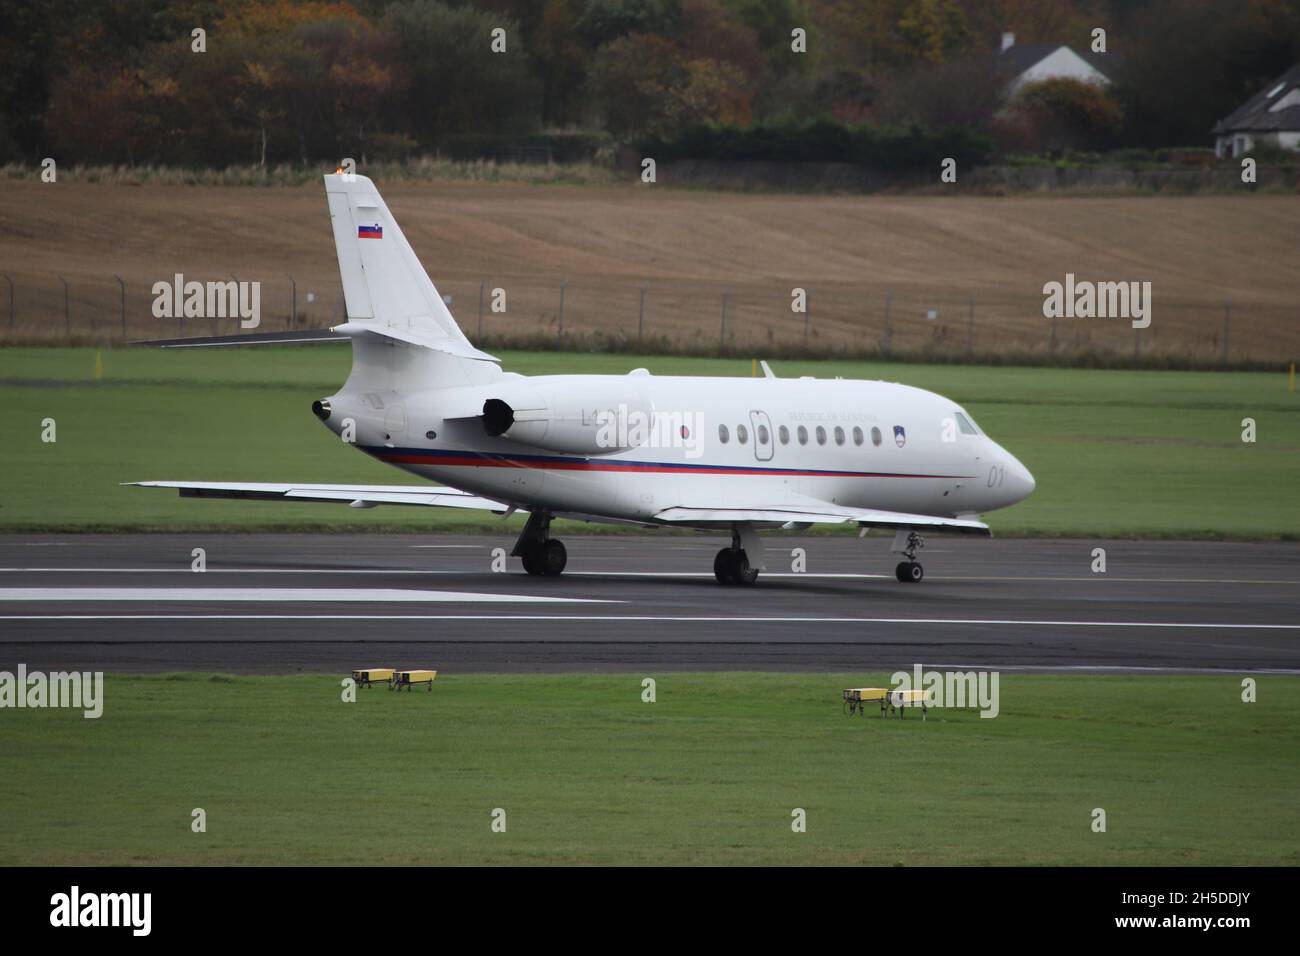 L1-01, a Dassault Falcon 2000EX operated by the Slovenian Air Force in a VIP transport role, at Prestwick International Airport in Ayrshire, Scotland. The aircraft was in Scotland to bring Slovenian delegates to the COP26 climate change summit in nearby Glasgow. Stock Photo